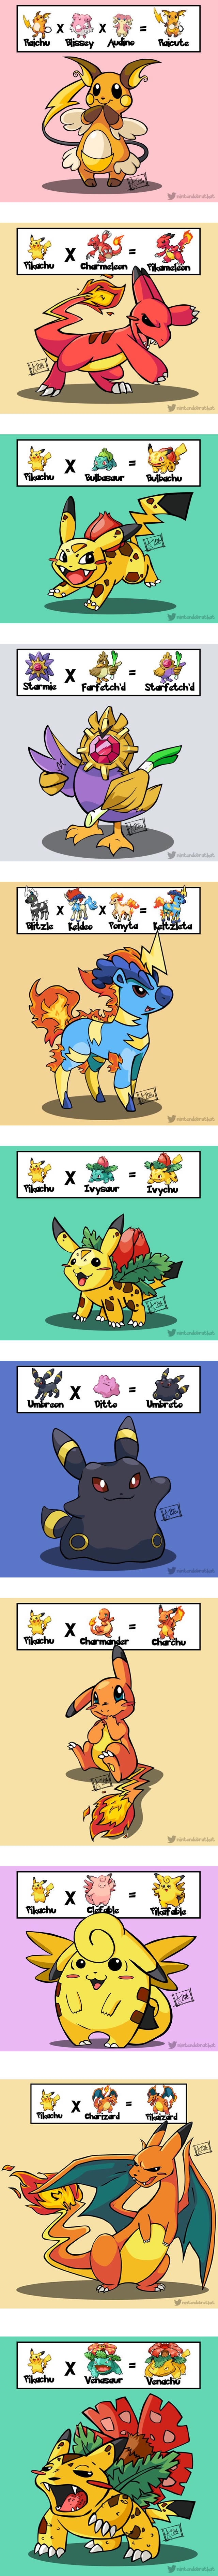 What is your dream Pokemon combination?